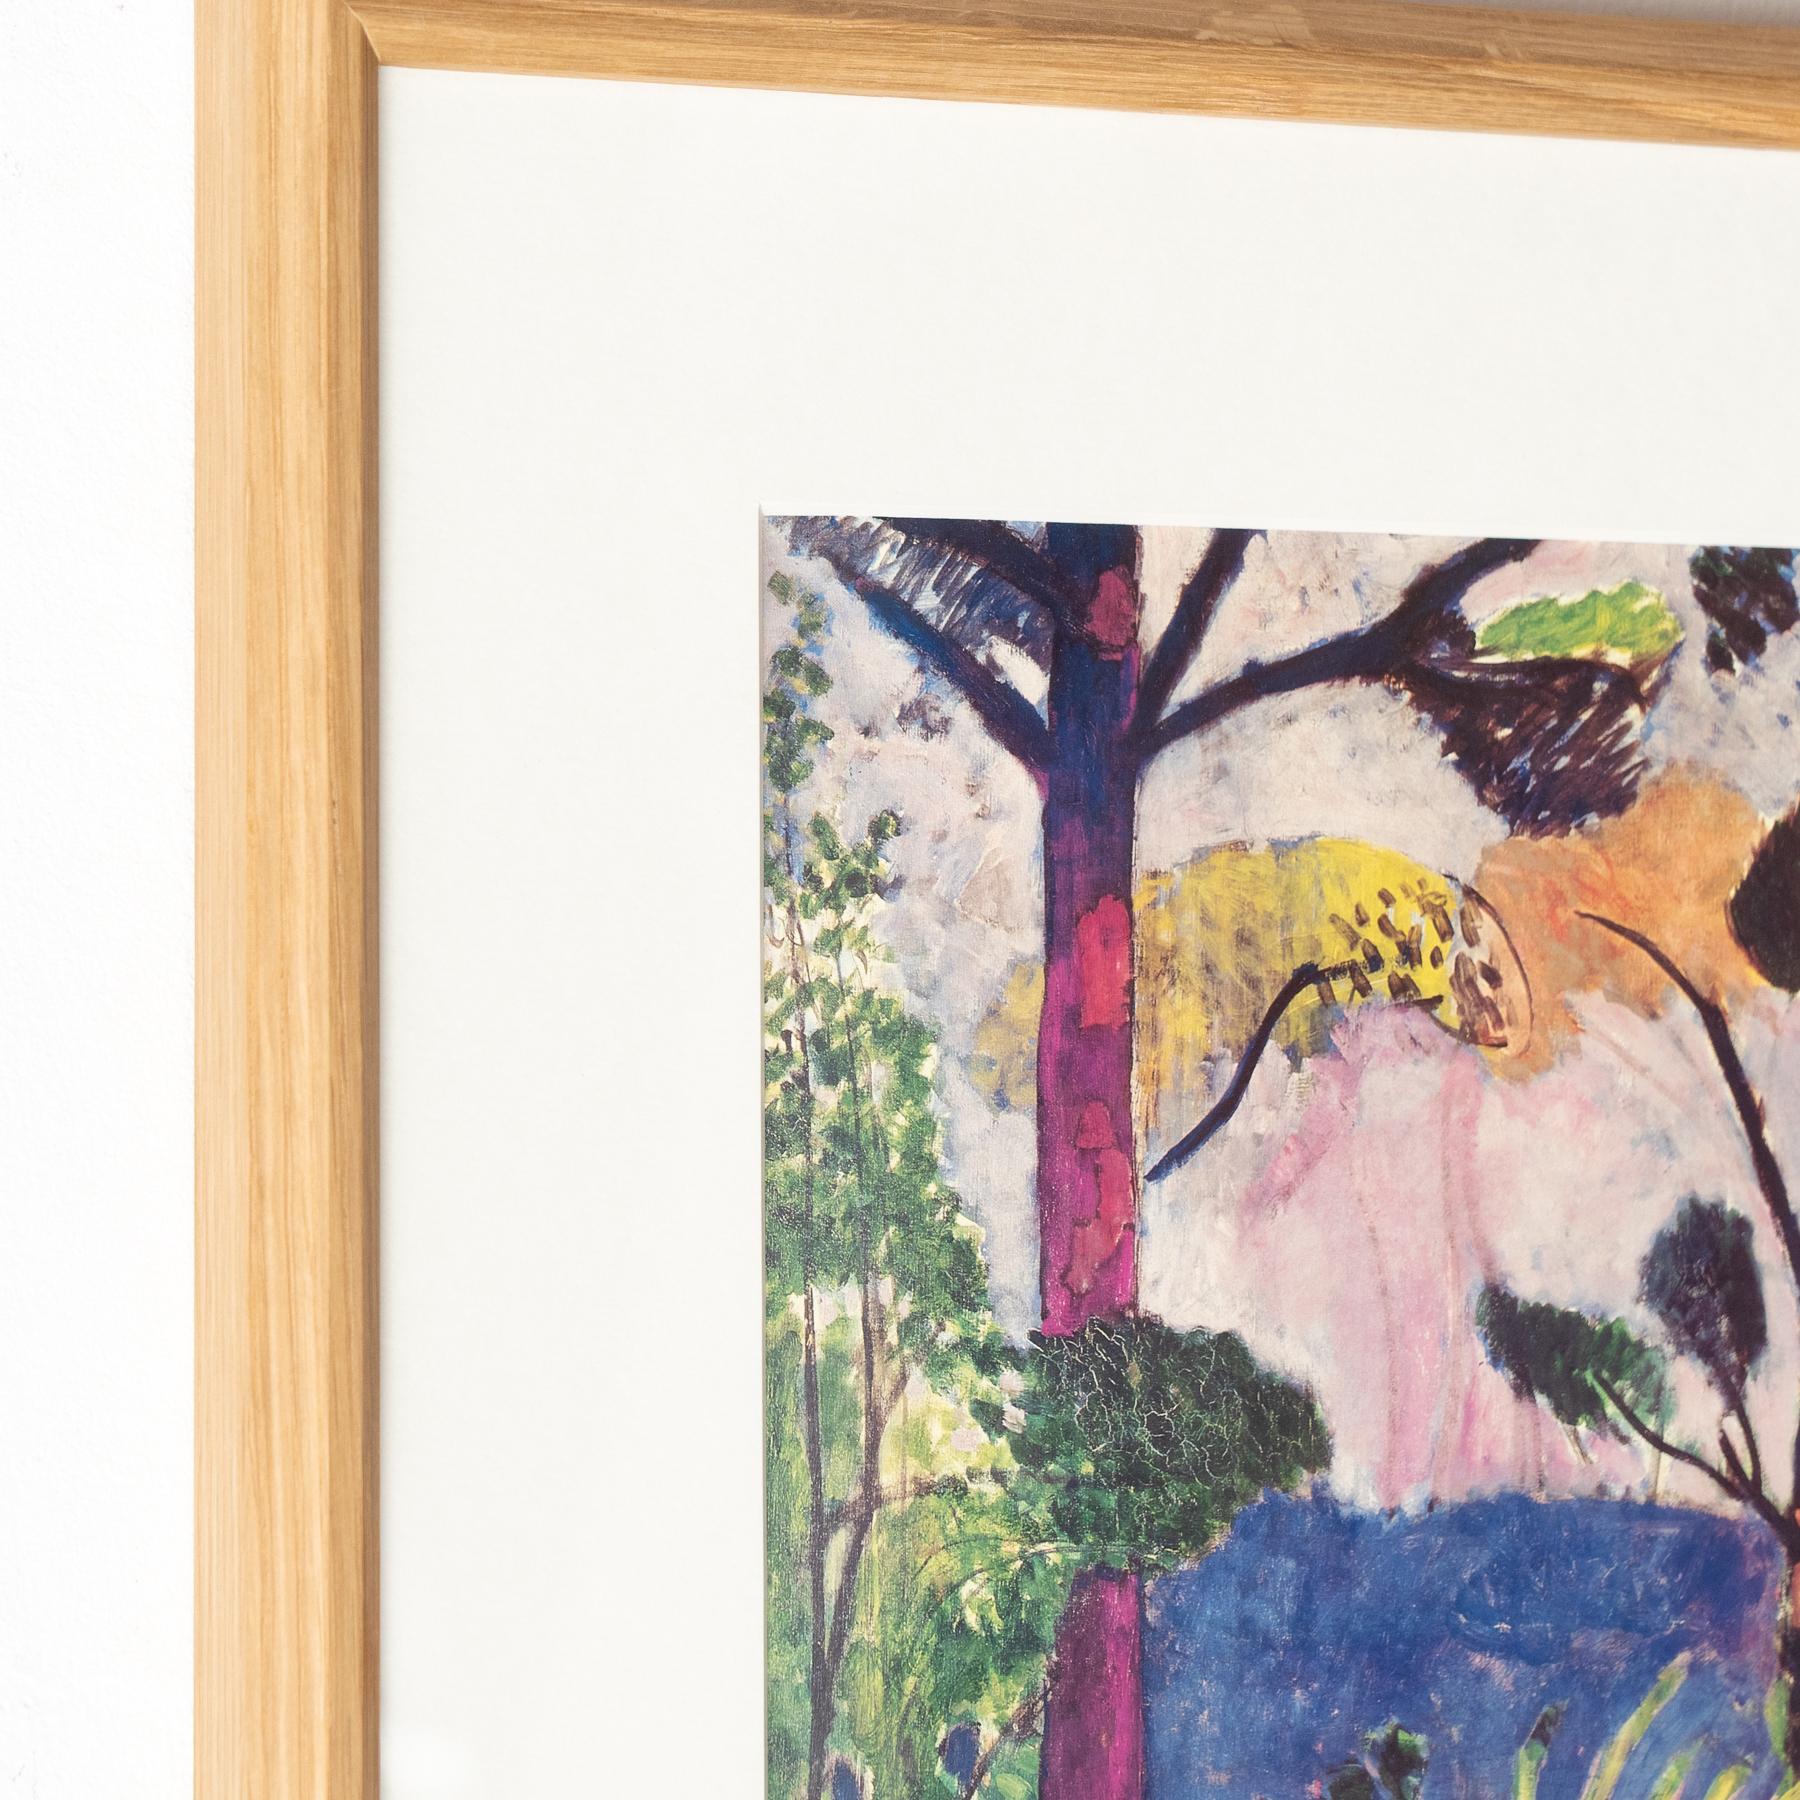 Paper Matisse Framed Colorful Print by Moderna Museet, circa 1990  For Sale